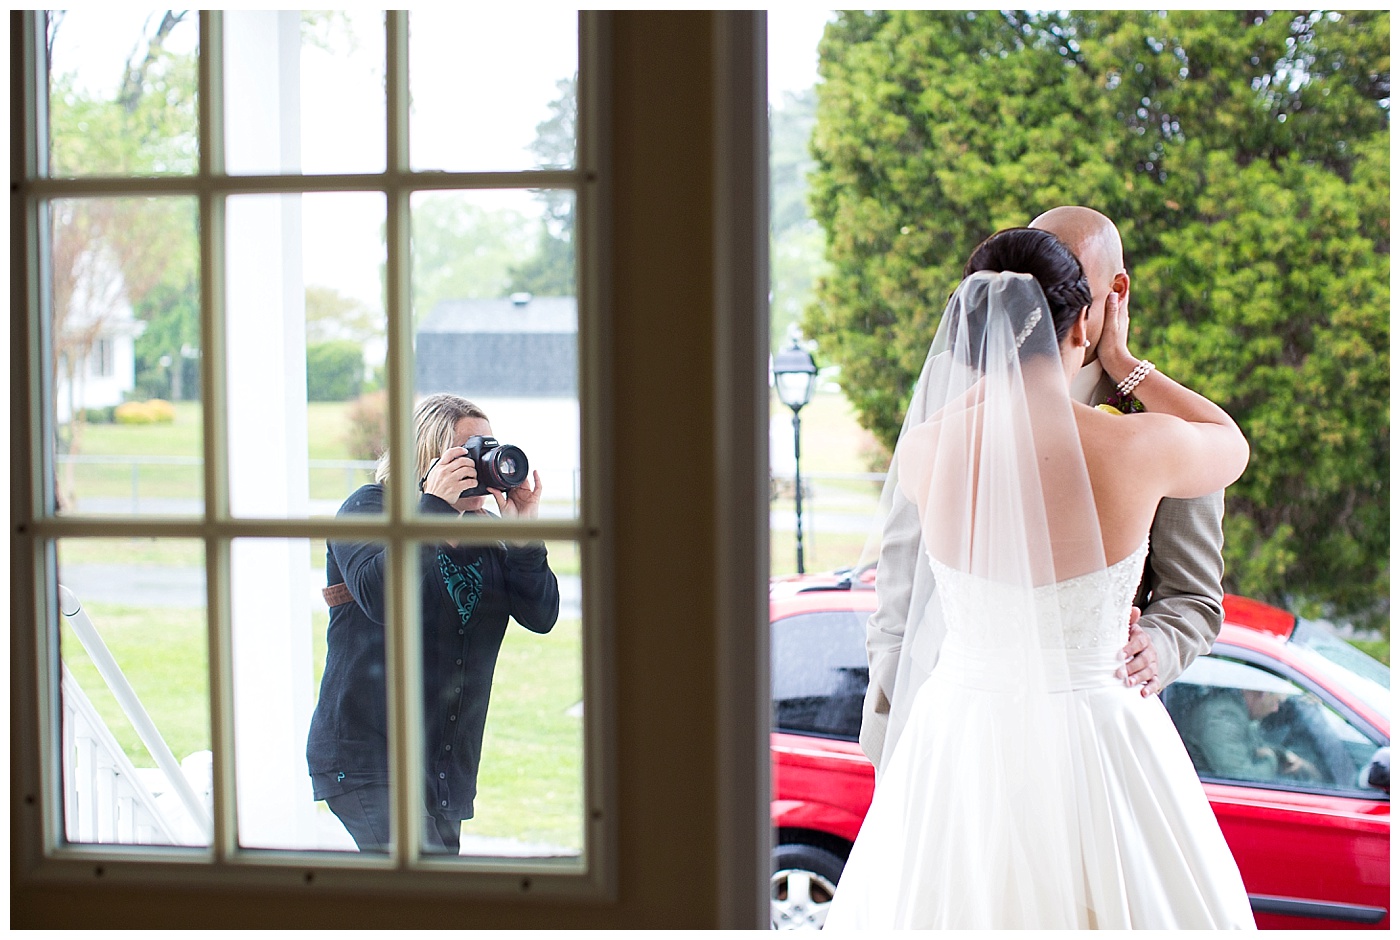 2015 Behind the Scenes | Wedding Photography